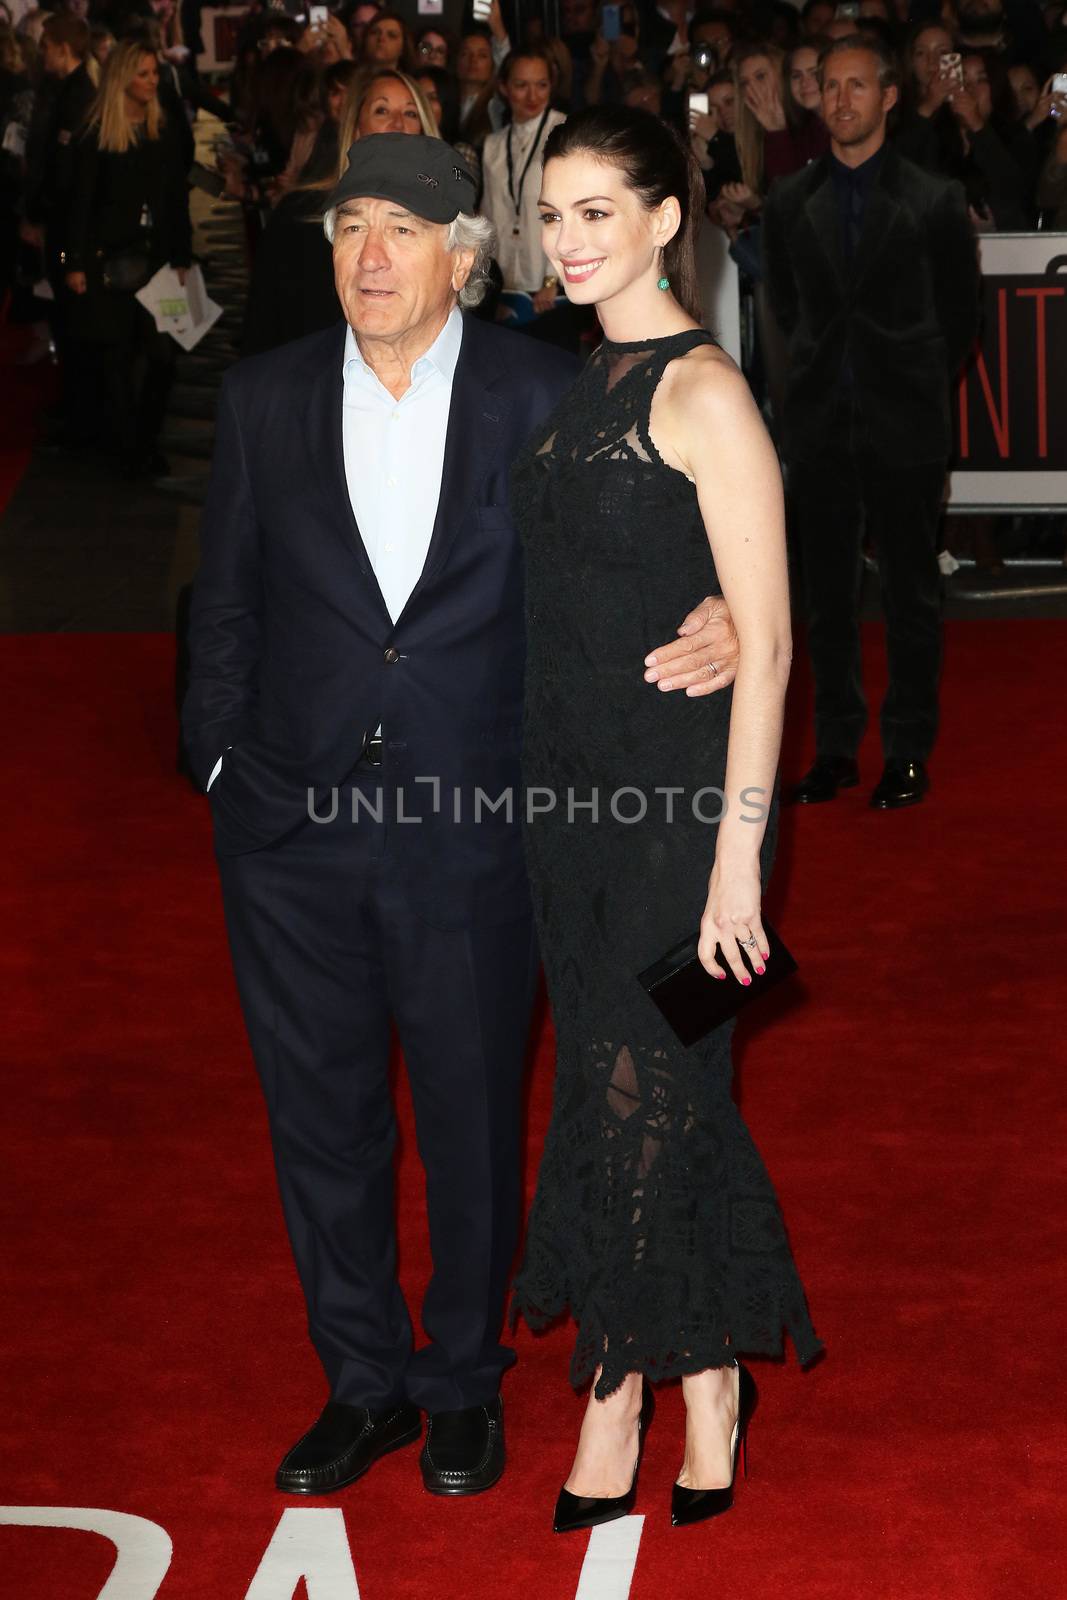 UNITED KINGDOM, London: Robert De Niro and Anne Hathaway attend the European premiere of The Intern at Leicester Square, London on September 27, 2015.